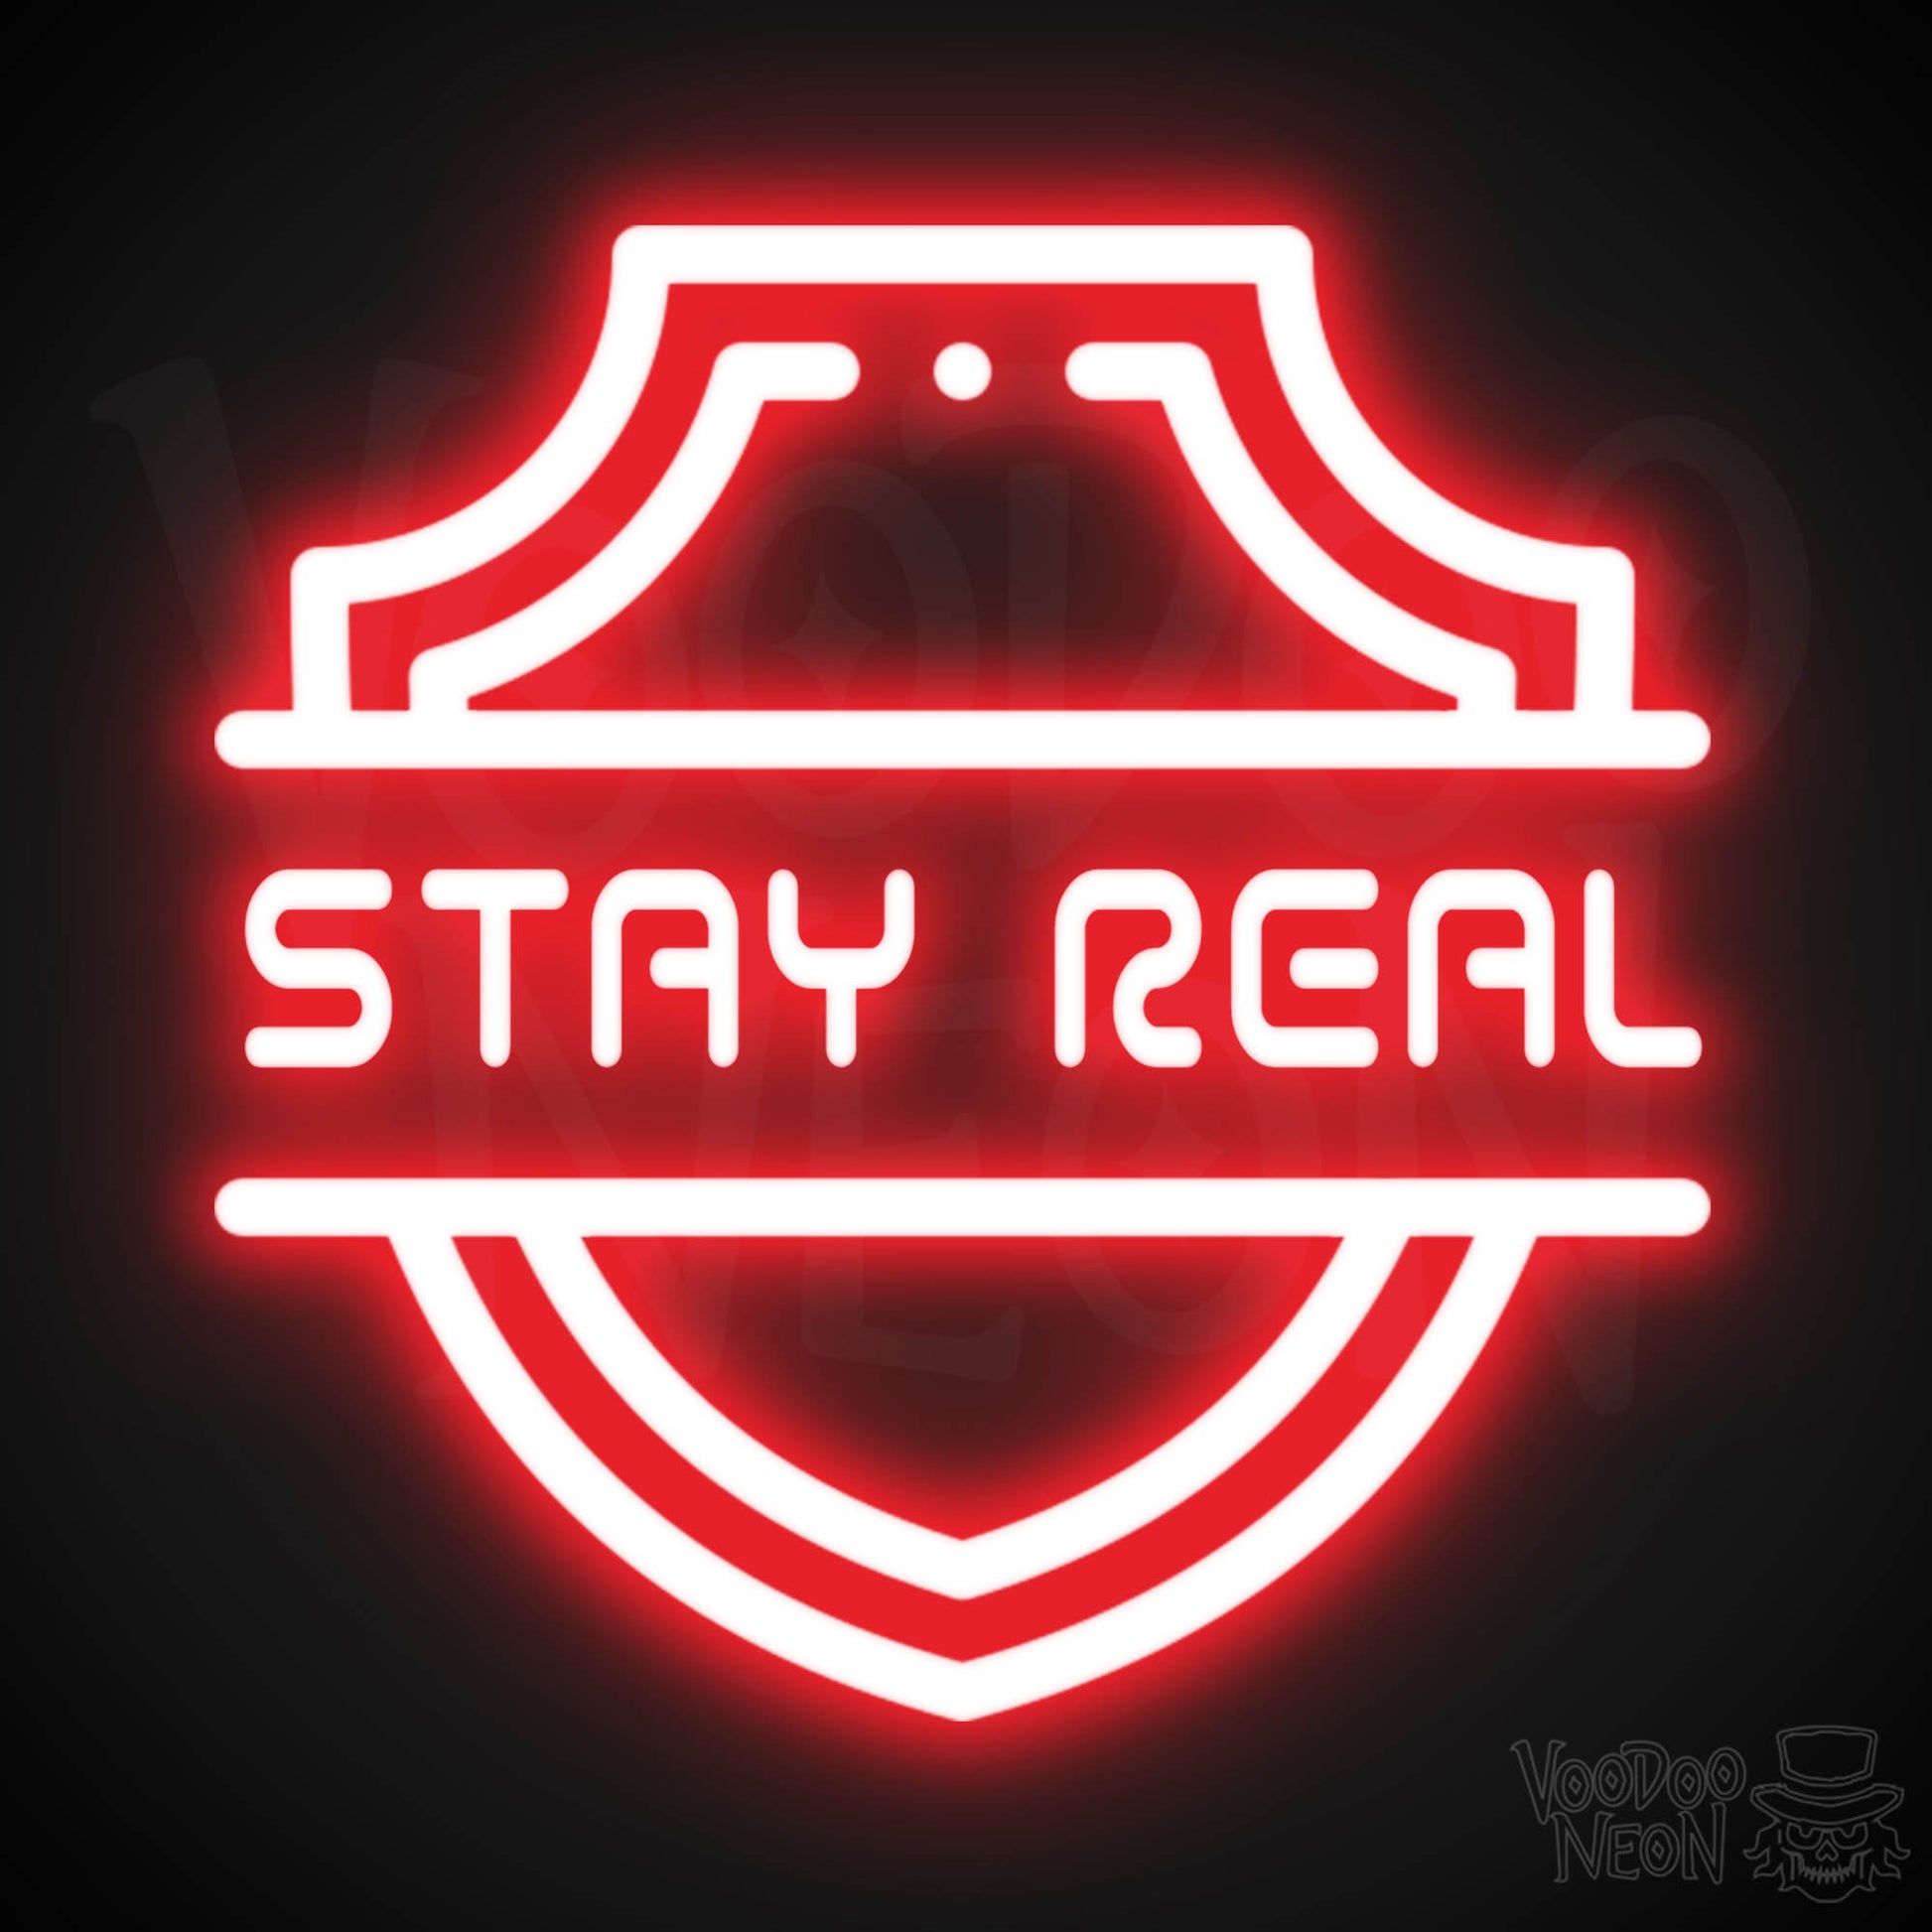 Stay Real Neon Sign - Neon Stay Real Sign - Neon Wall Art - Color Red